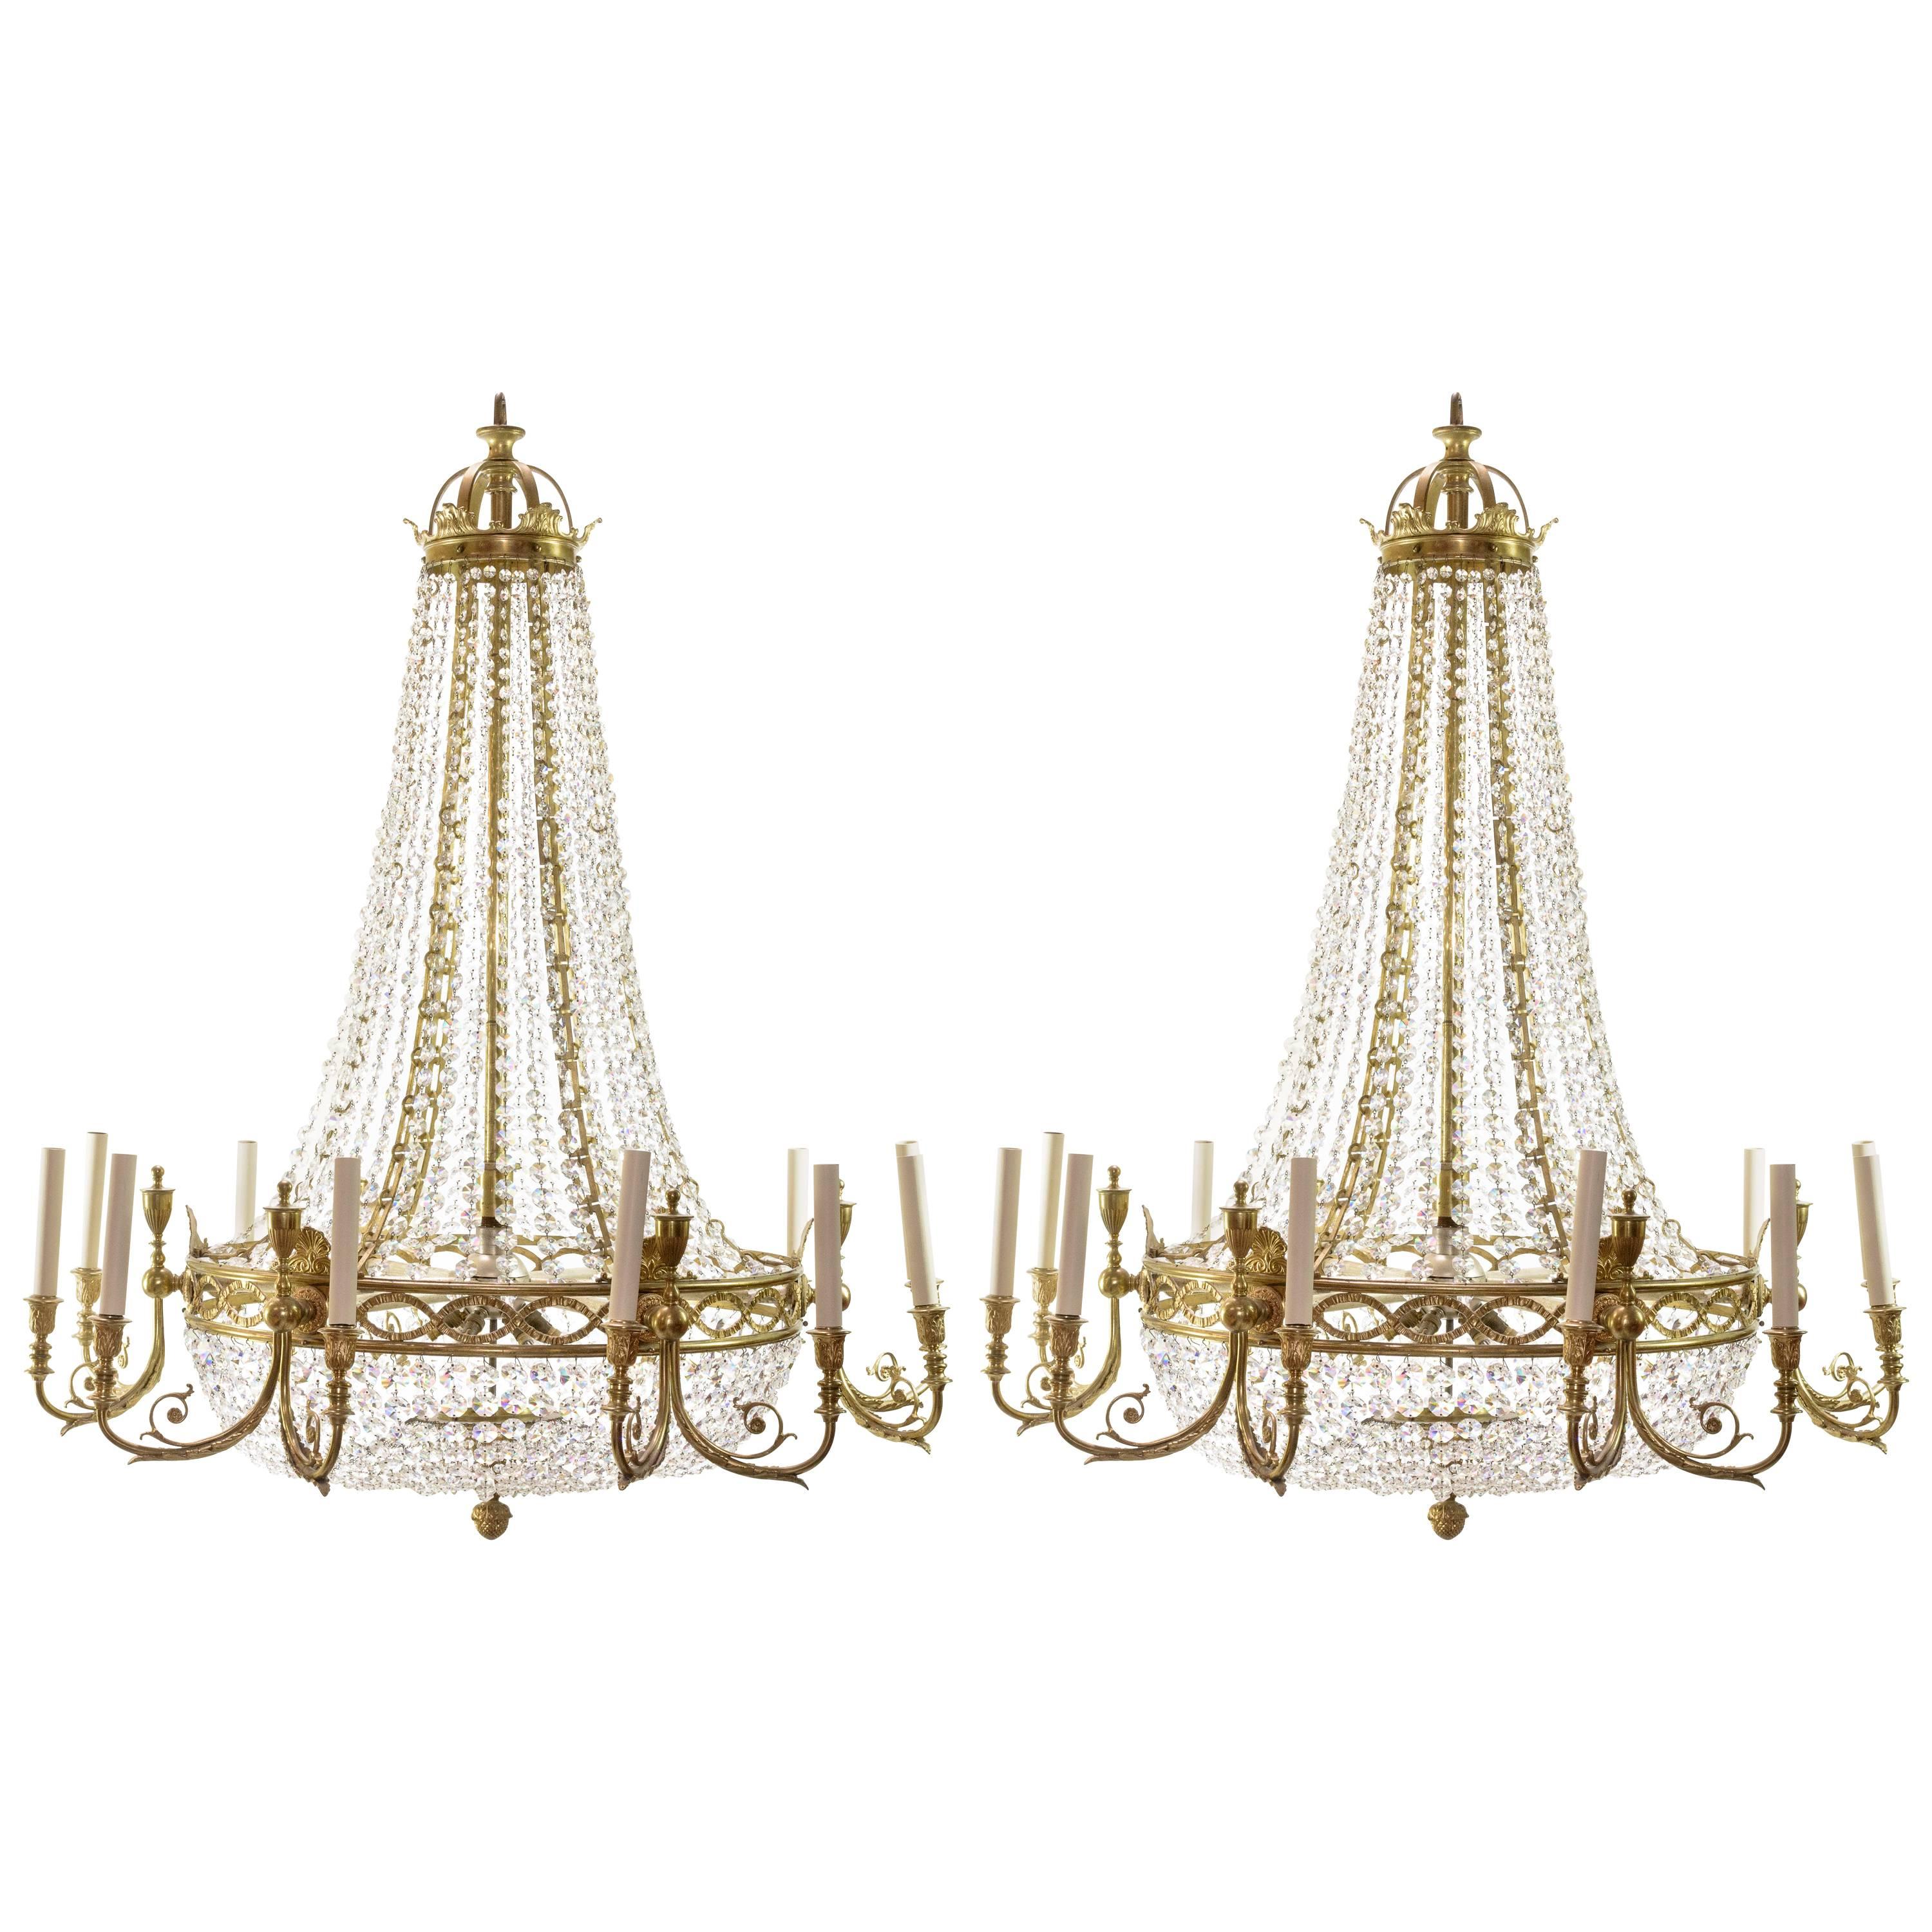 Two Substantial 18th Century Style Chandeliers